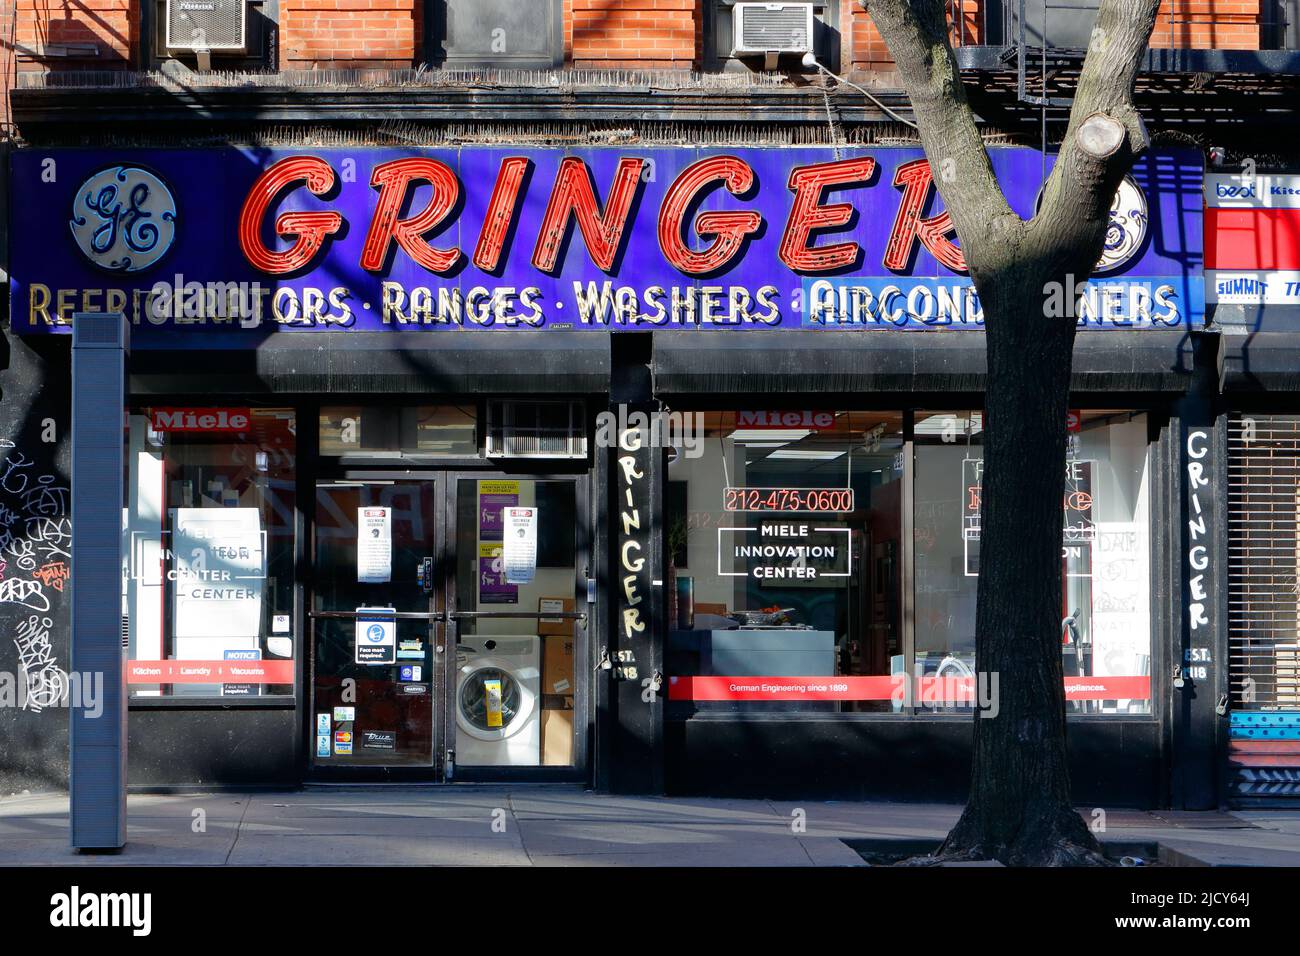 Gringer & Sons, 29 1st Ave., New York, NY. exterior storefront of an appliance store in the East Village neighborhood in Manhattan. Stock Photo